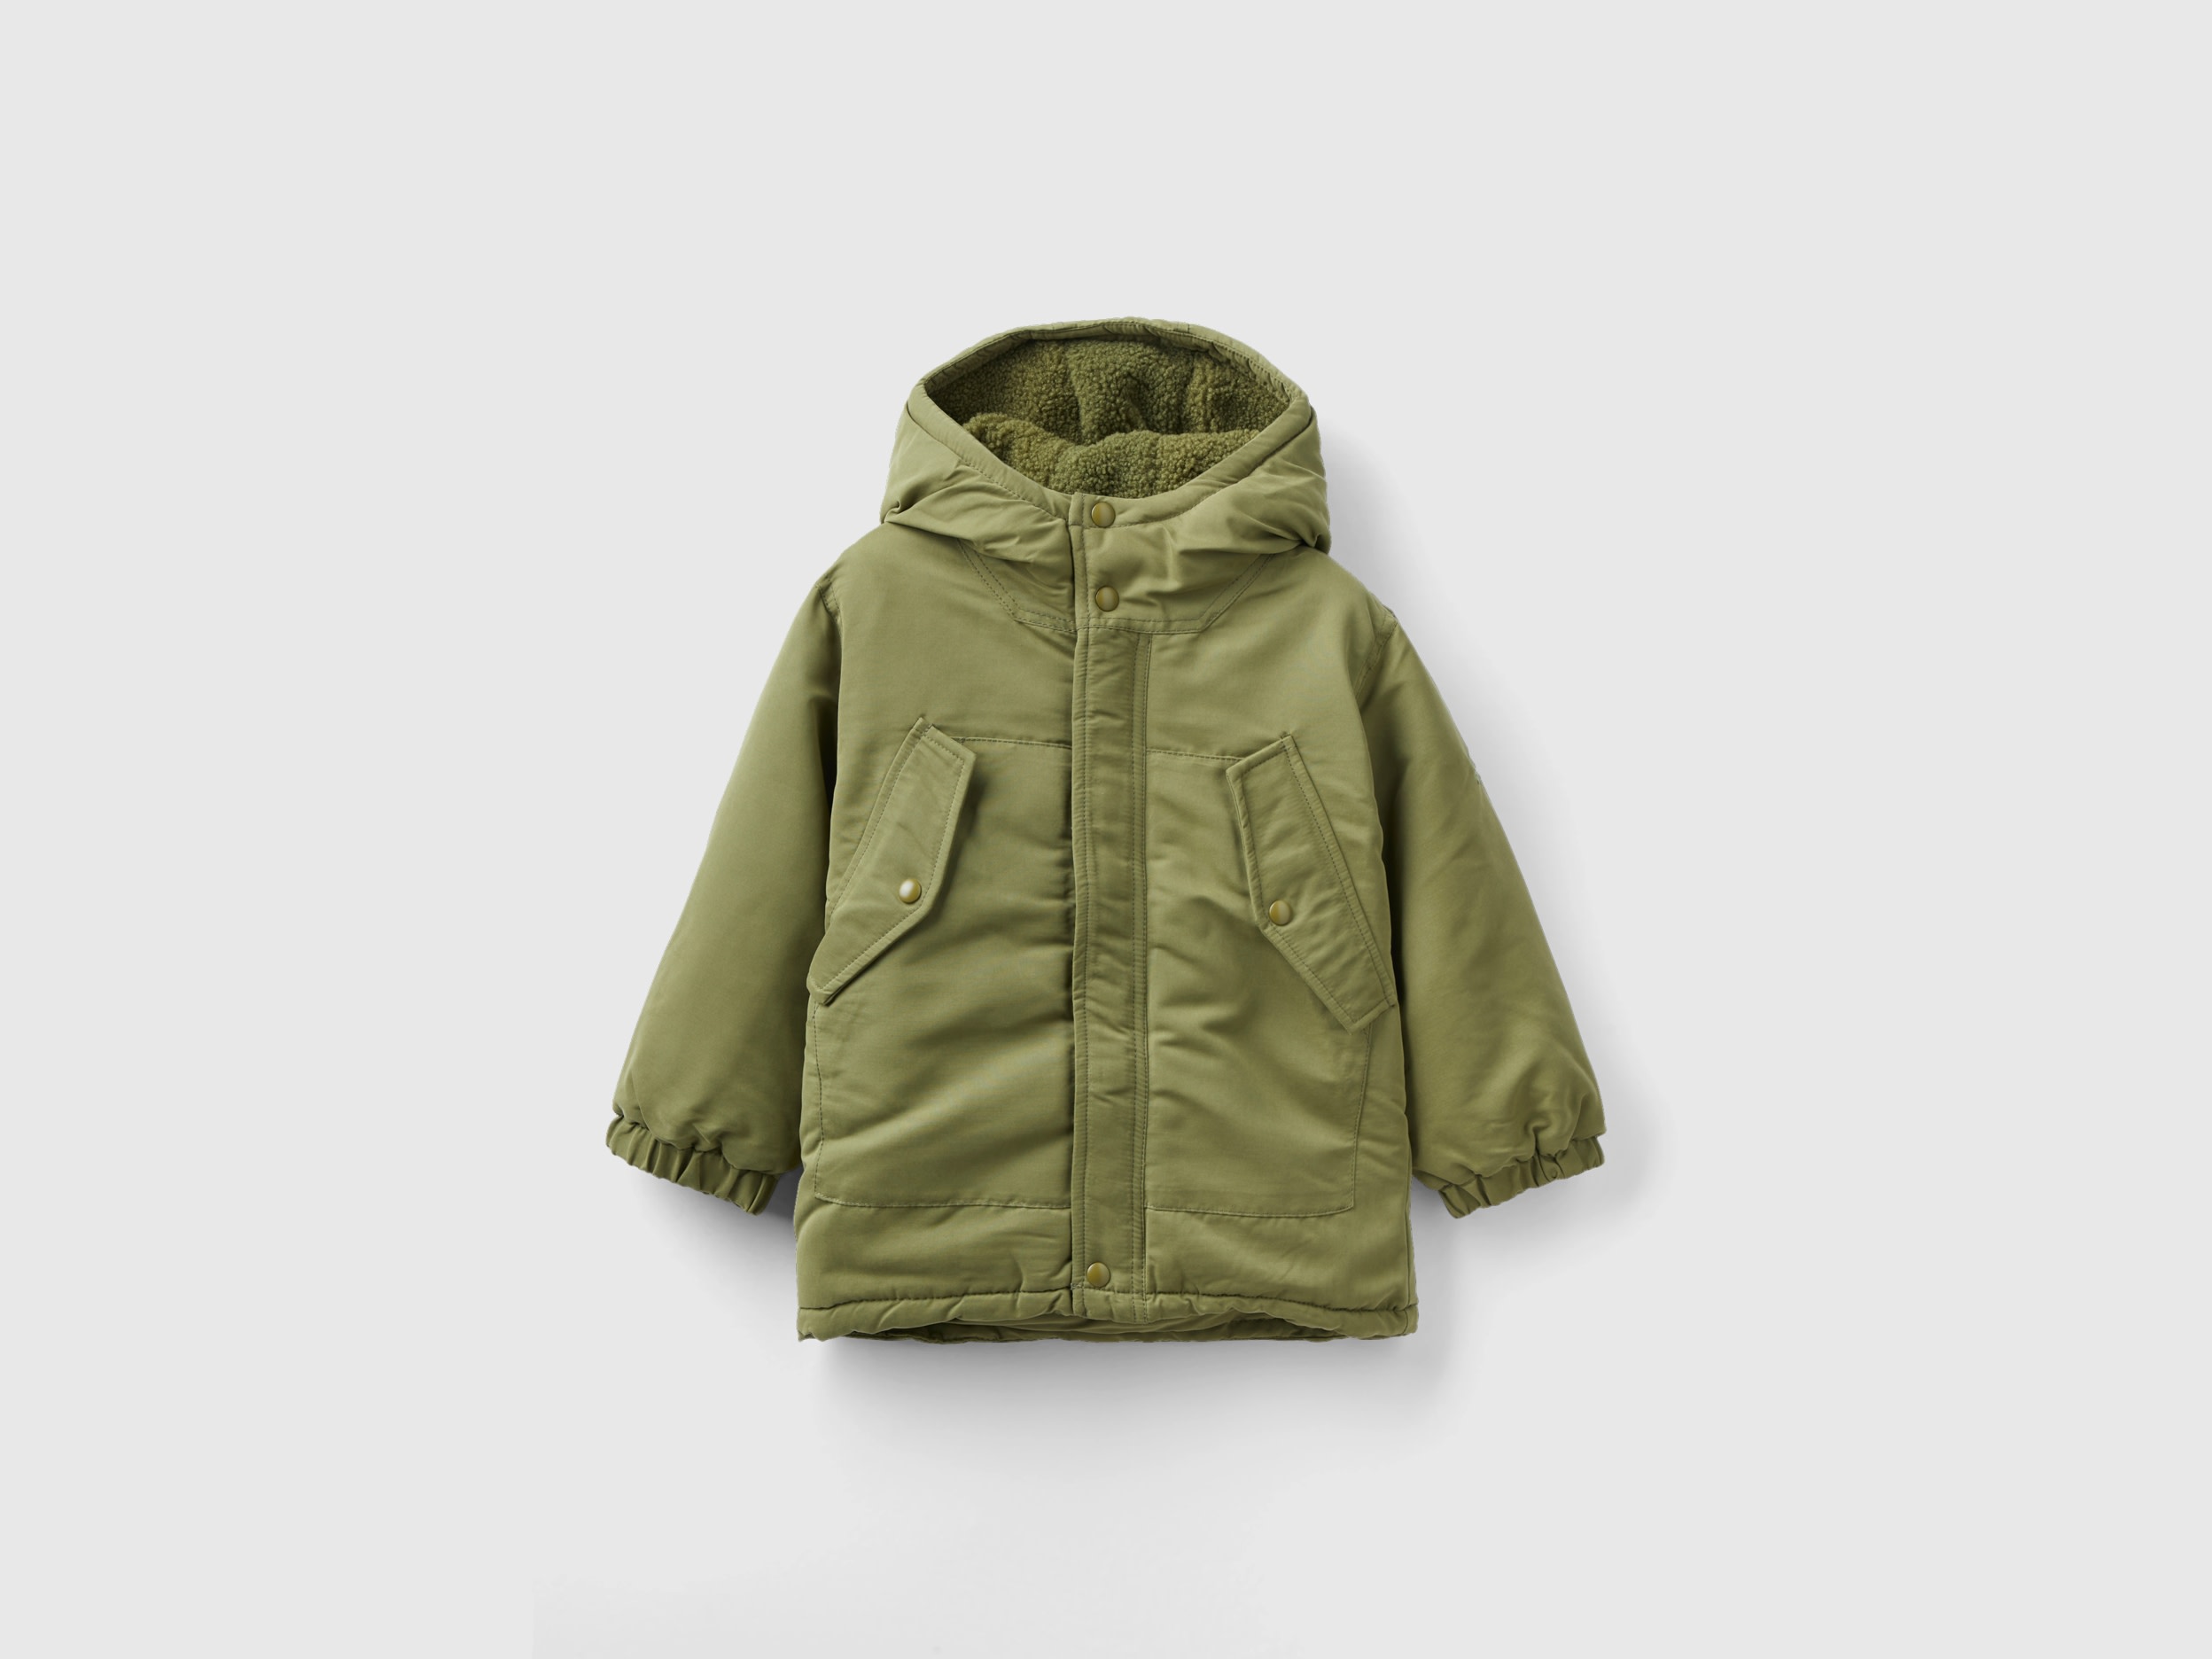 Benetton, Padded Parka With Pockets, size 5-6, Military Green, Kids